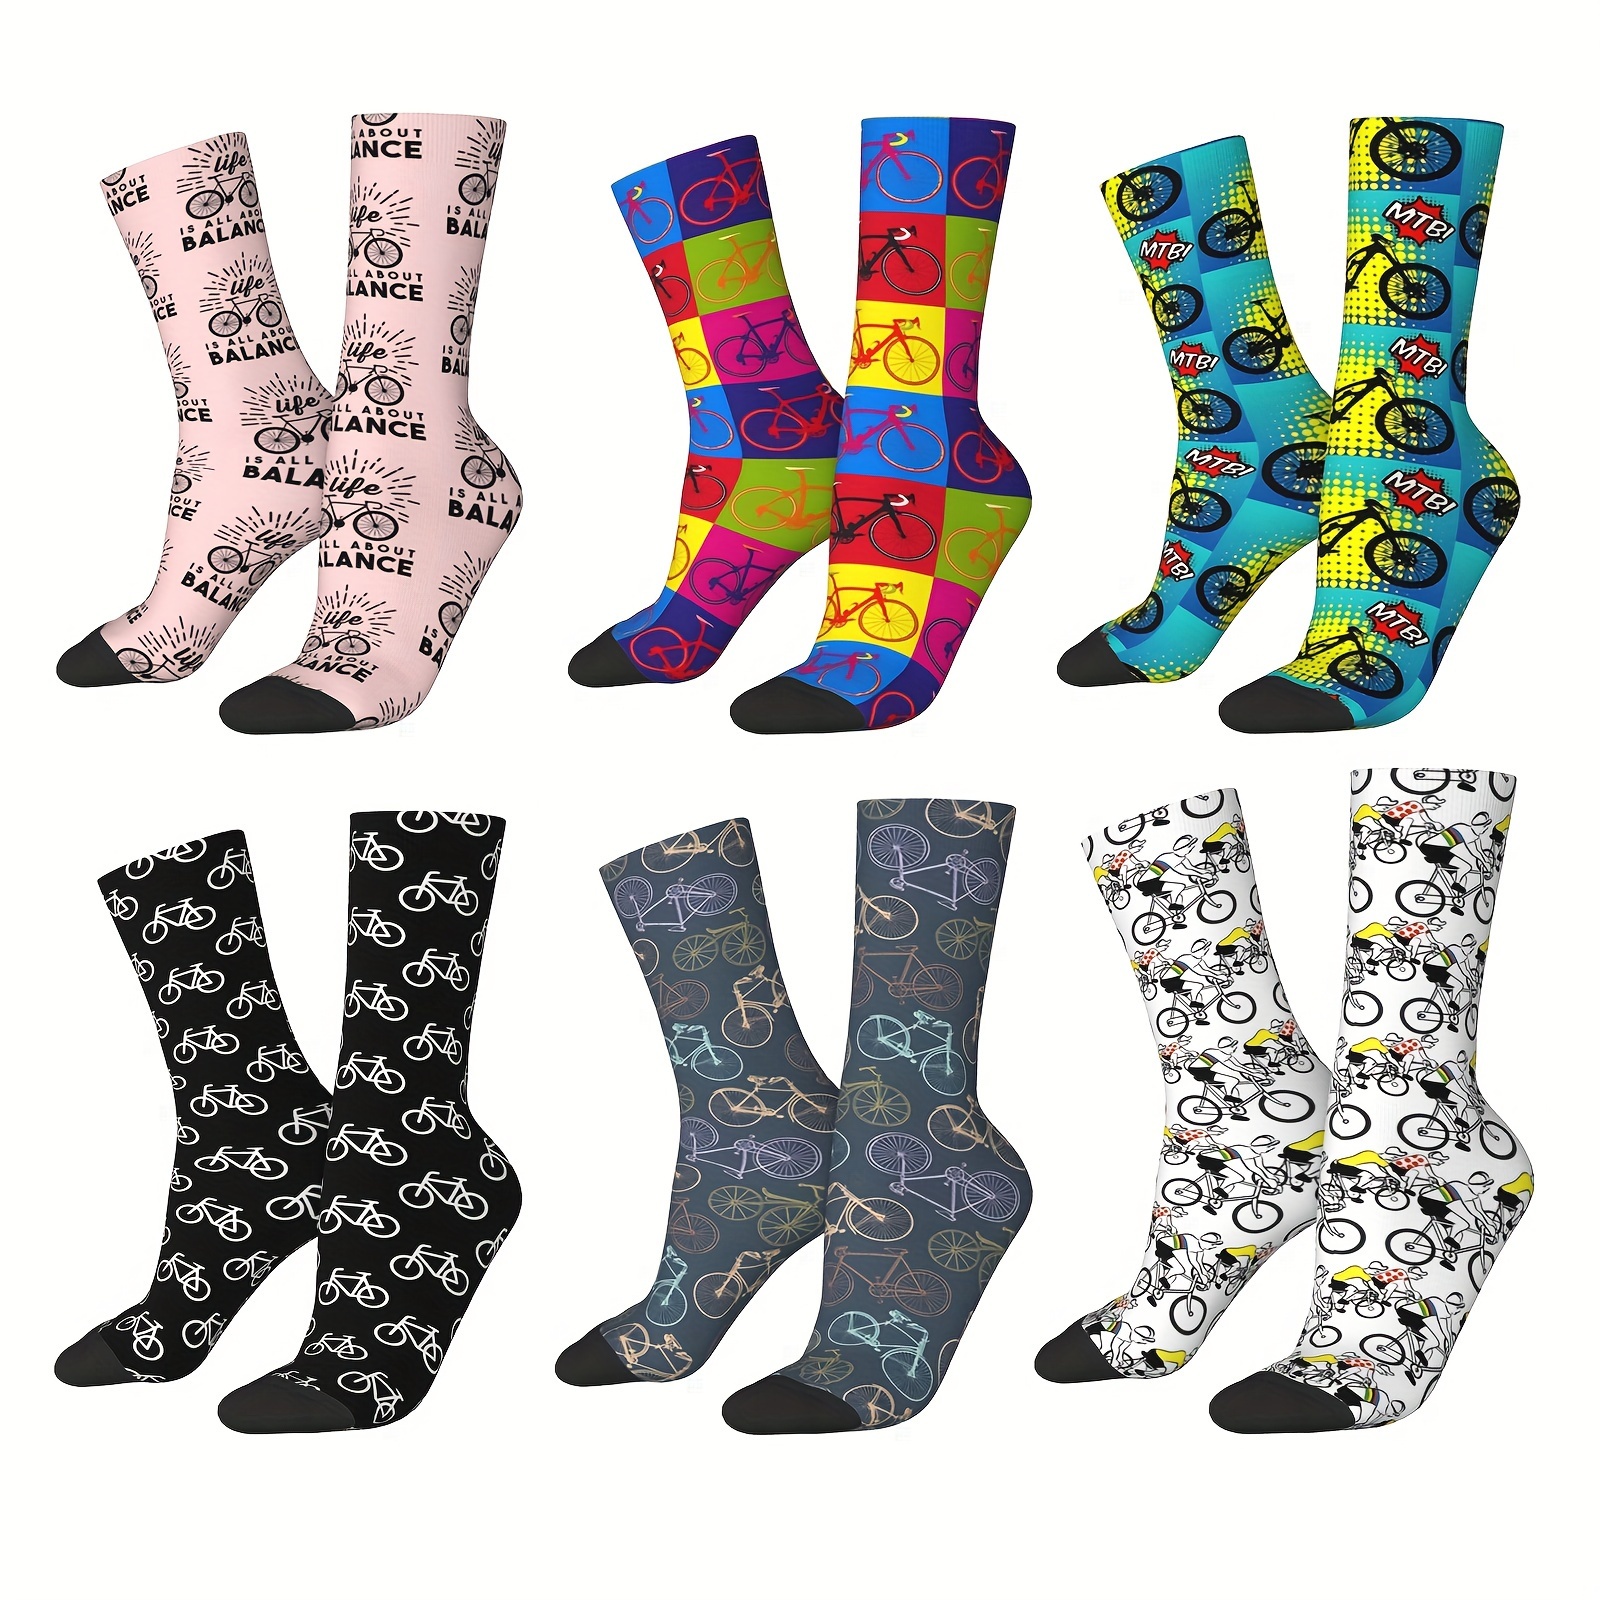 

1 Pair Of Men's Novelty Various Bicycle Pattern Crew Socks, Breathable Comfy Casual Unisex Socks For Men's Outdoor Wearing All Seasons Wearing